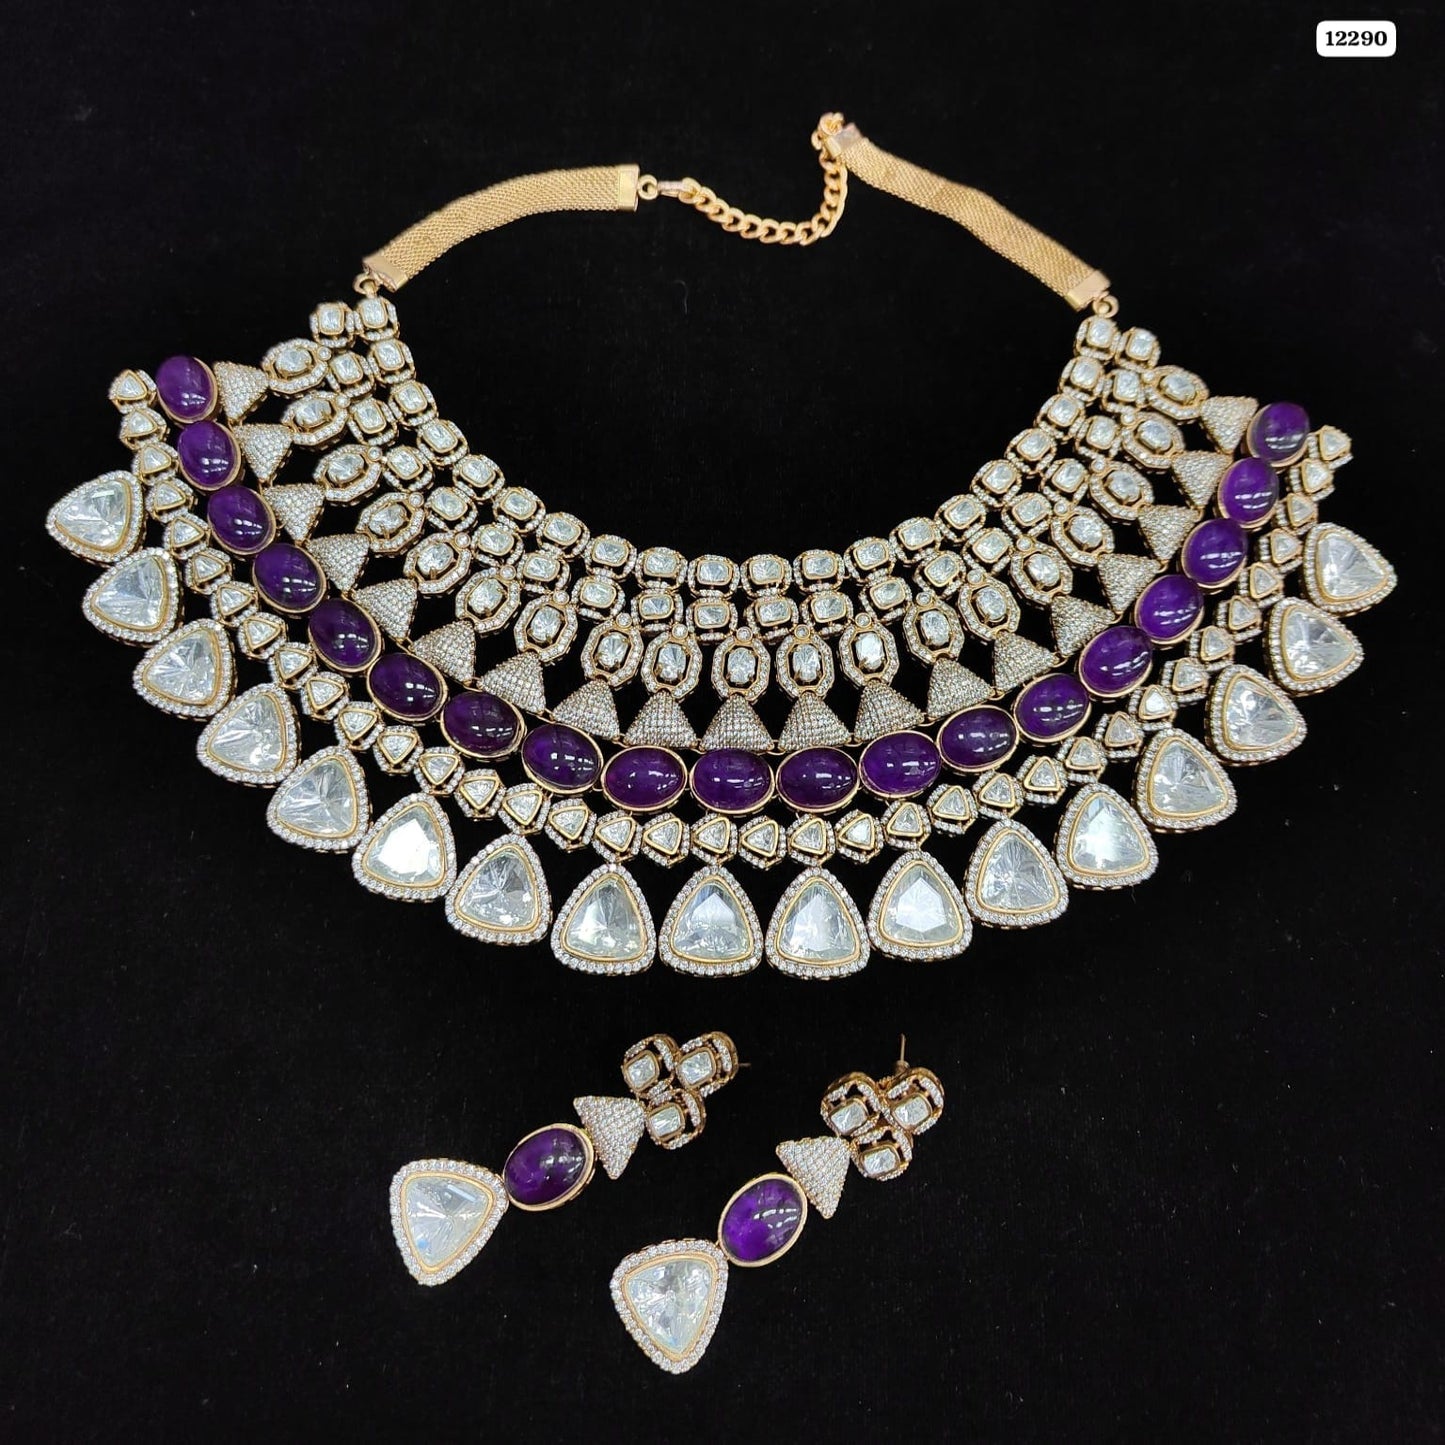 Sovereign Elegance: High Quality Polki Kundan Necklace Set with Matching Earrings